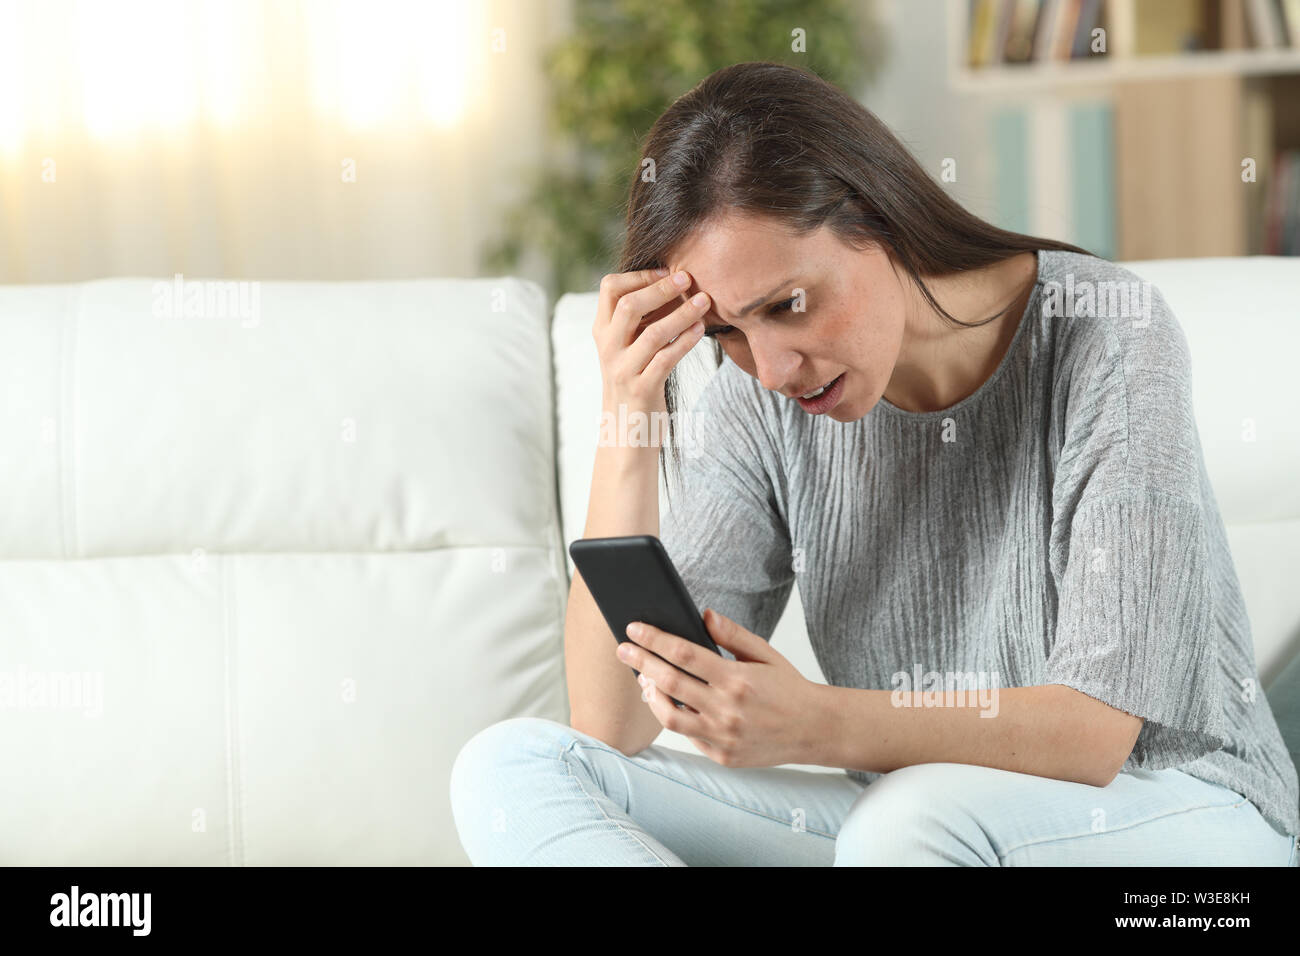 Worried woman checking smart phone sitting on a couch in the living room at home Stock Photo